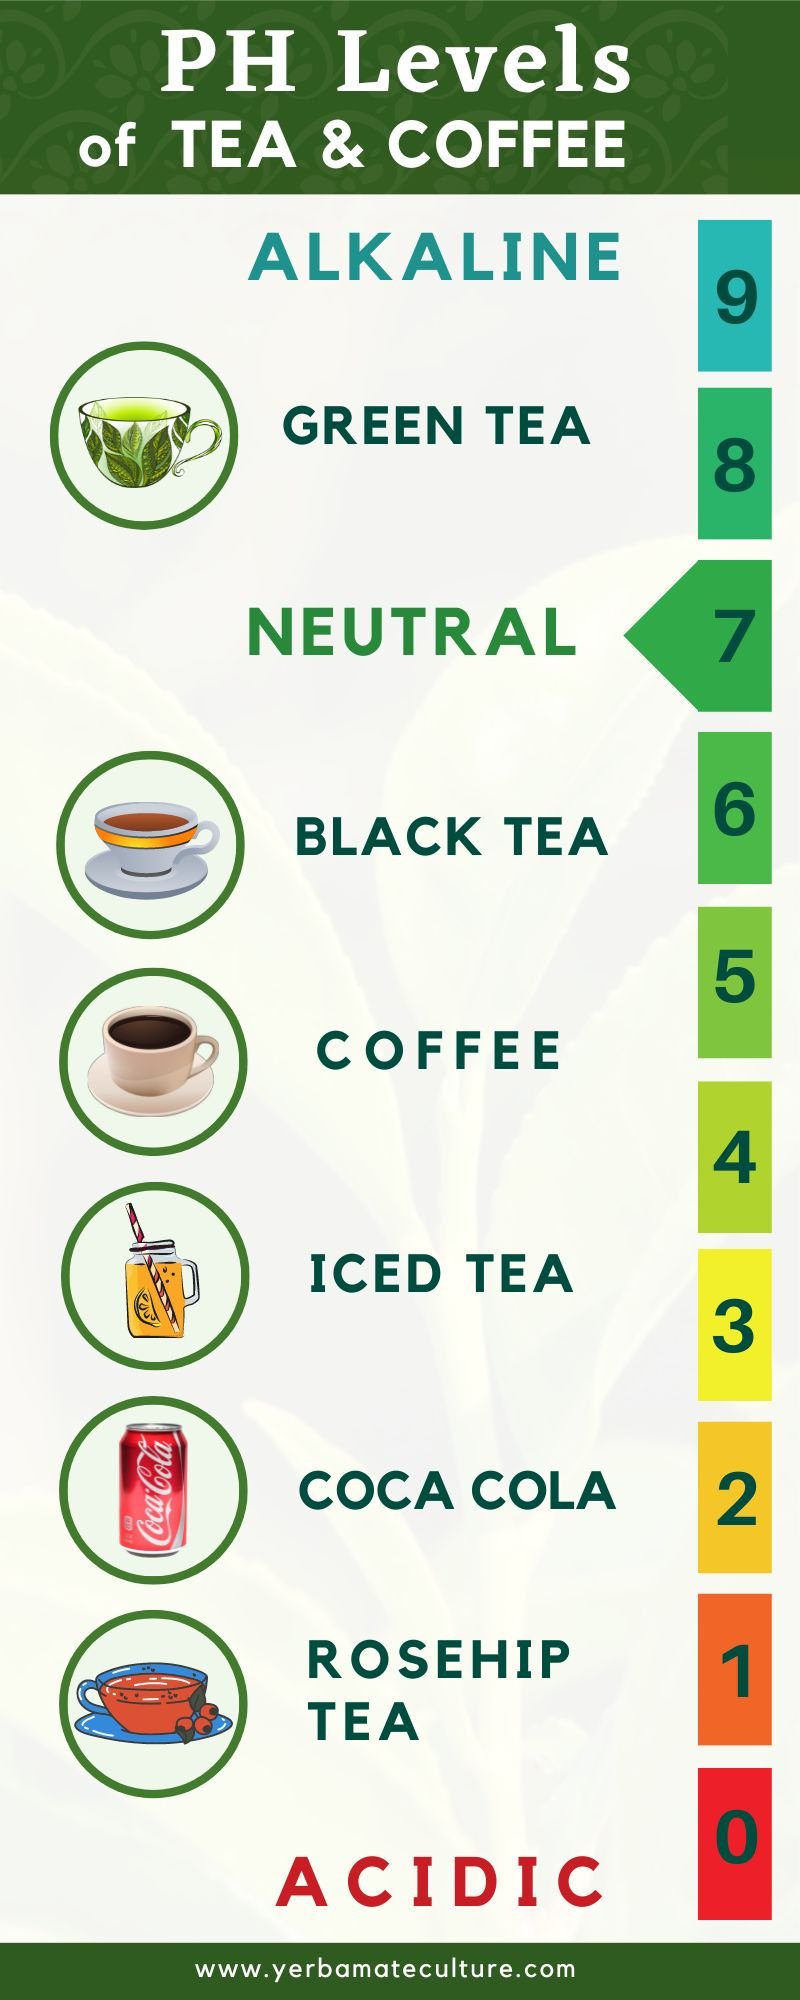 PH levels of tea and coffee